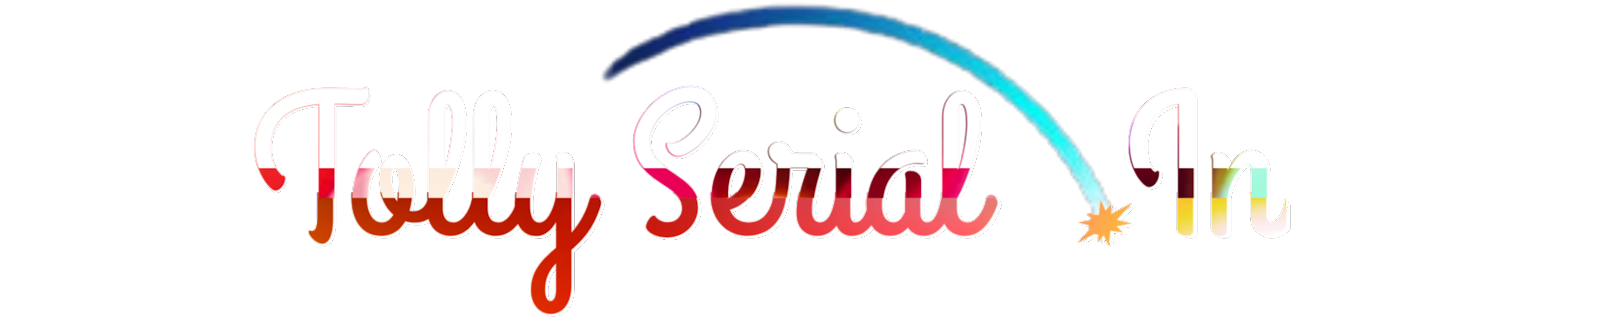 Tolly Serial 